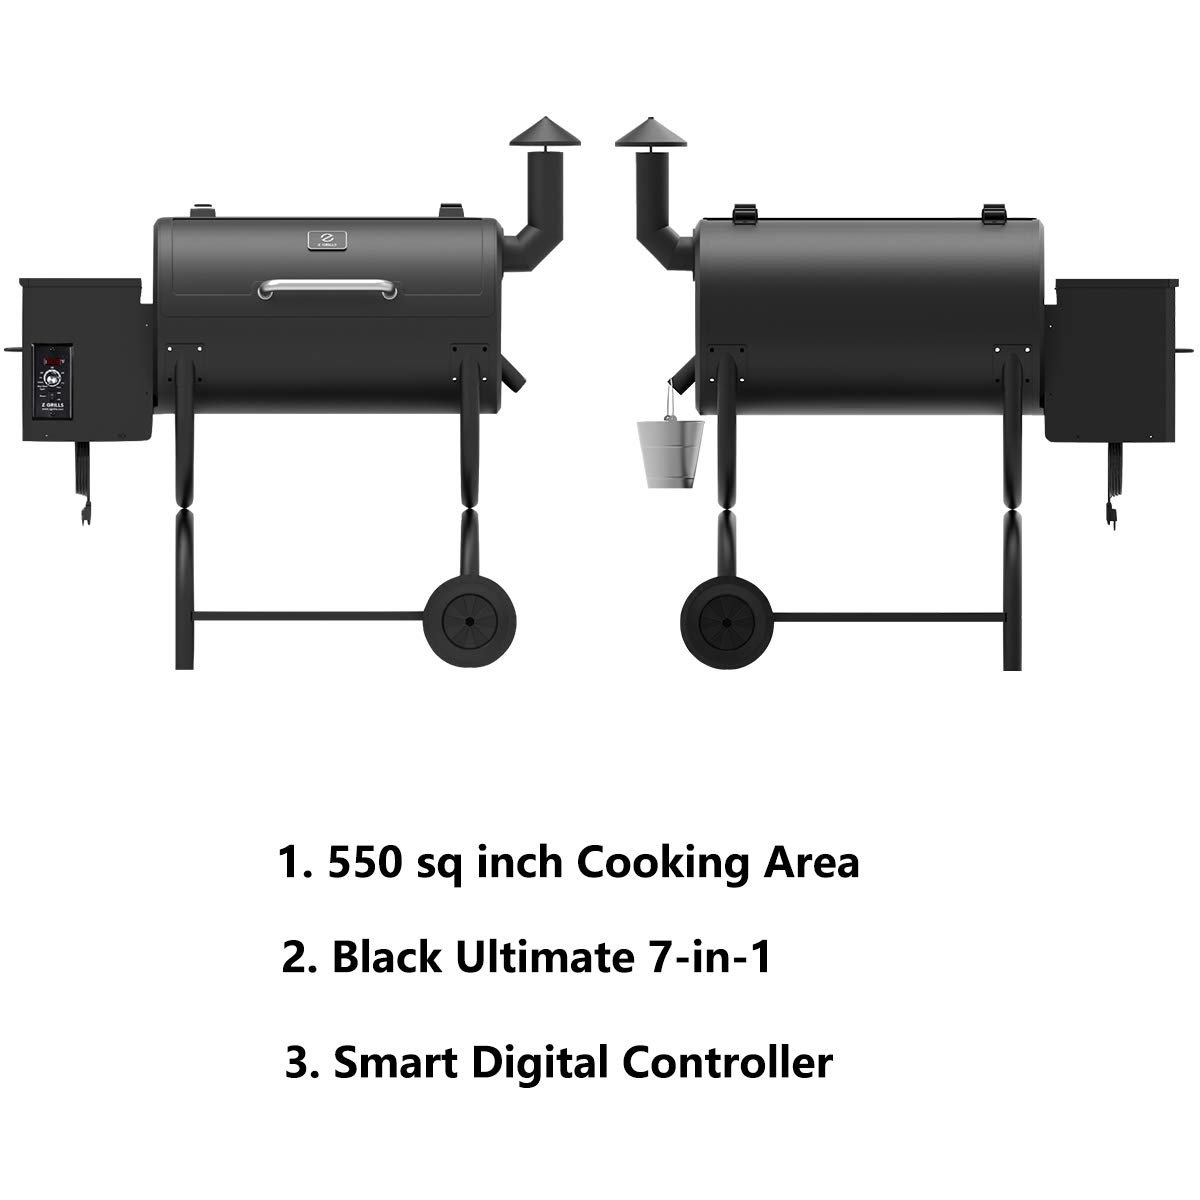 Z GRILLS 550B Wood Pellet Grill & Smoker 8 in 1 BBQ Grill Auto Temperature Control, 550 sq Inch Deal, Black - image 2 of 11